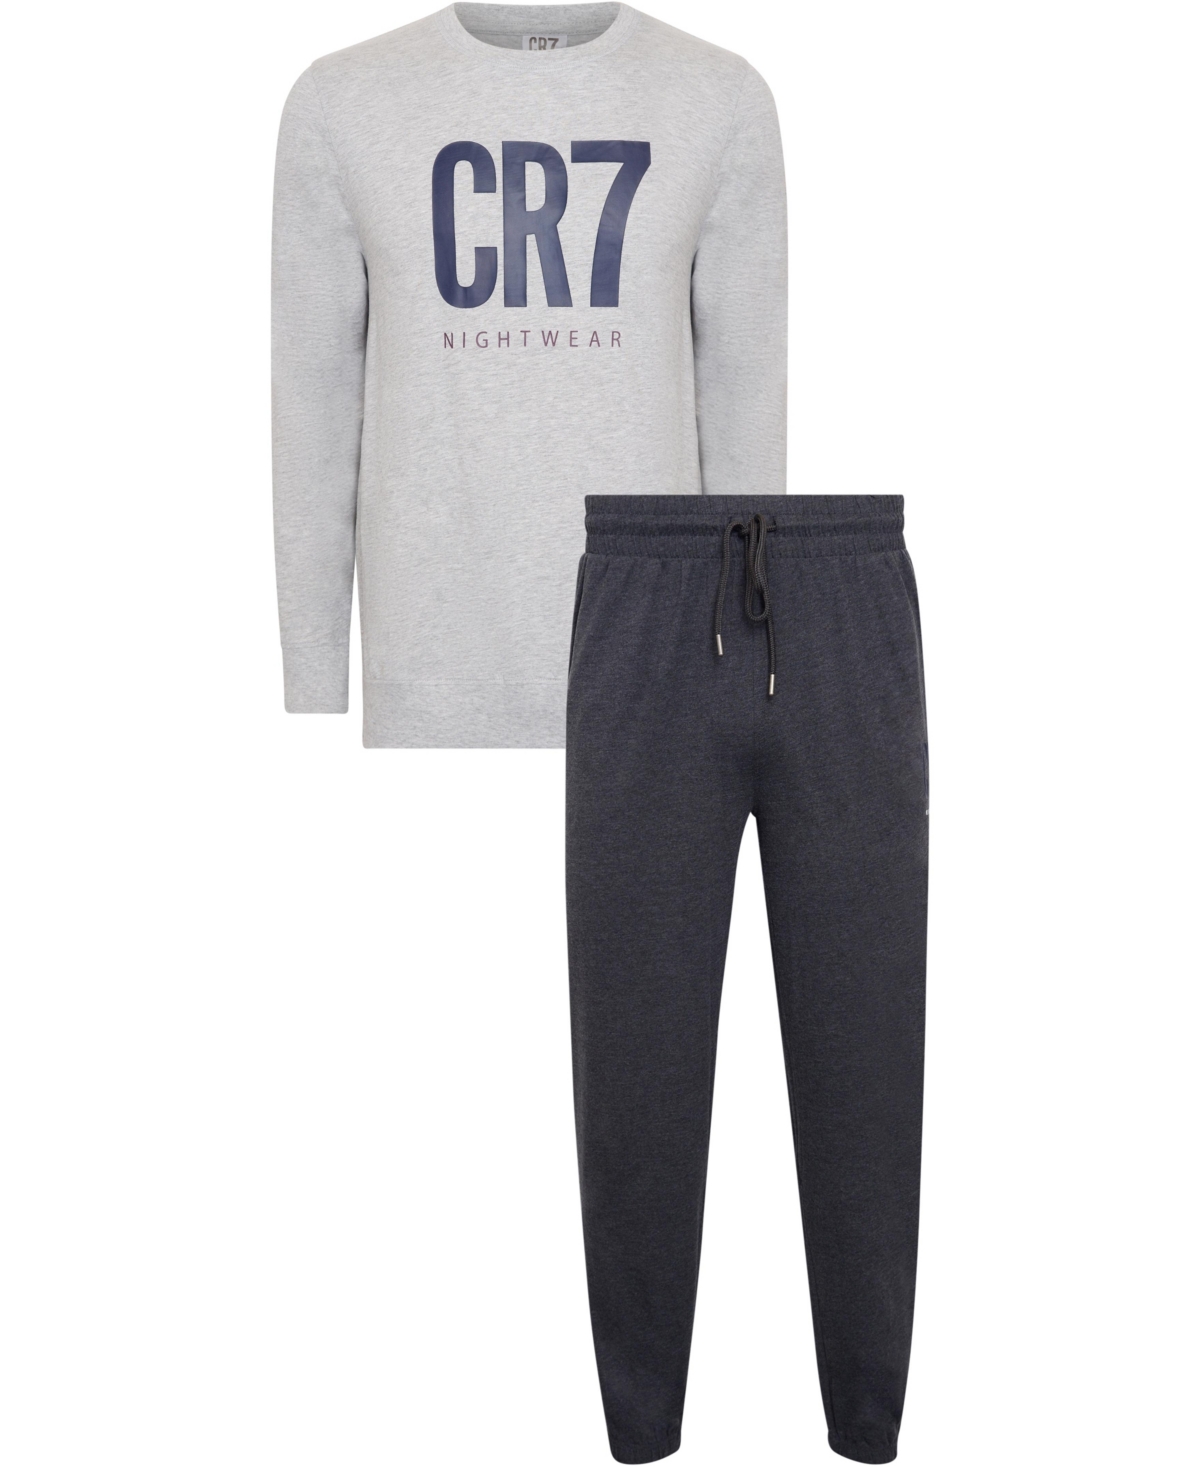 Cr7 Men's Cotton Loungewear Top And Pant Set In Gray,blue